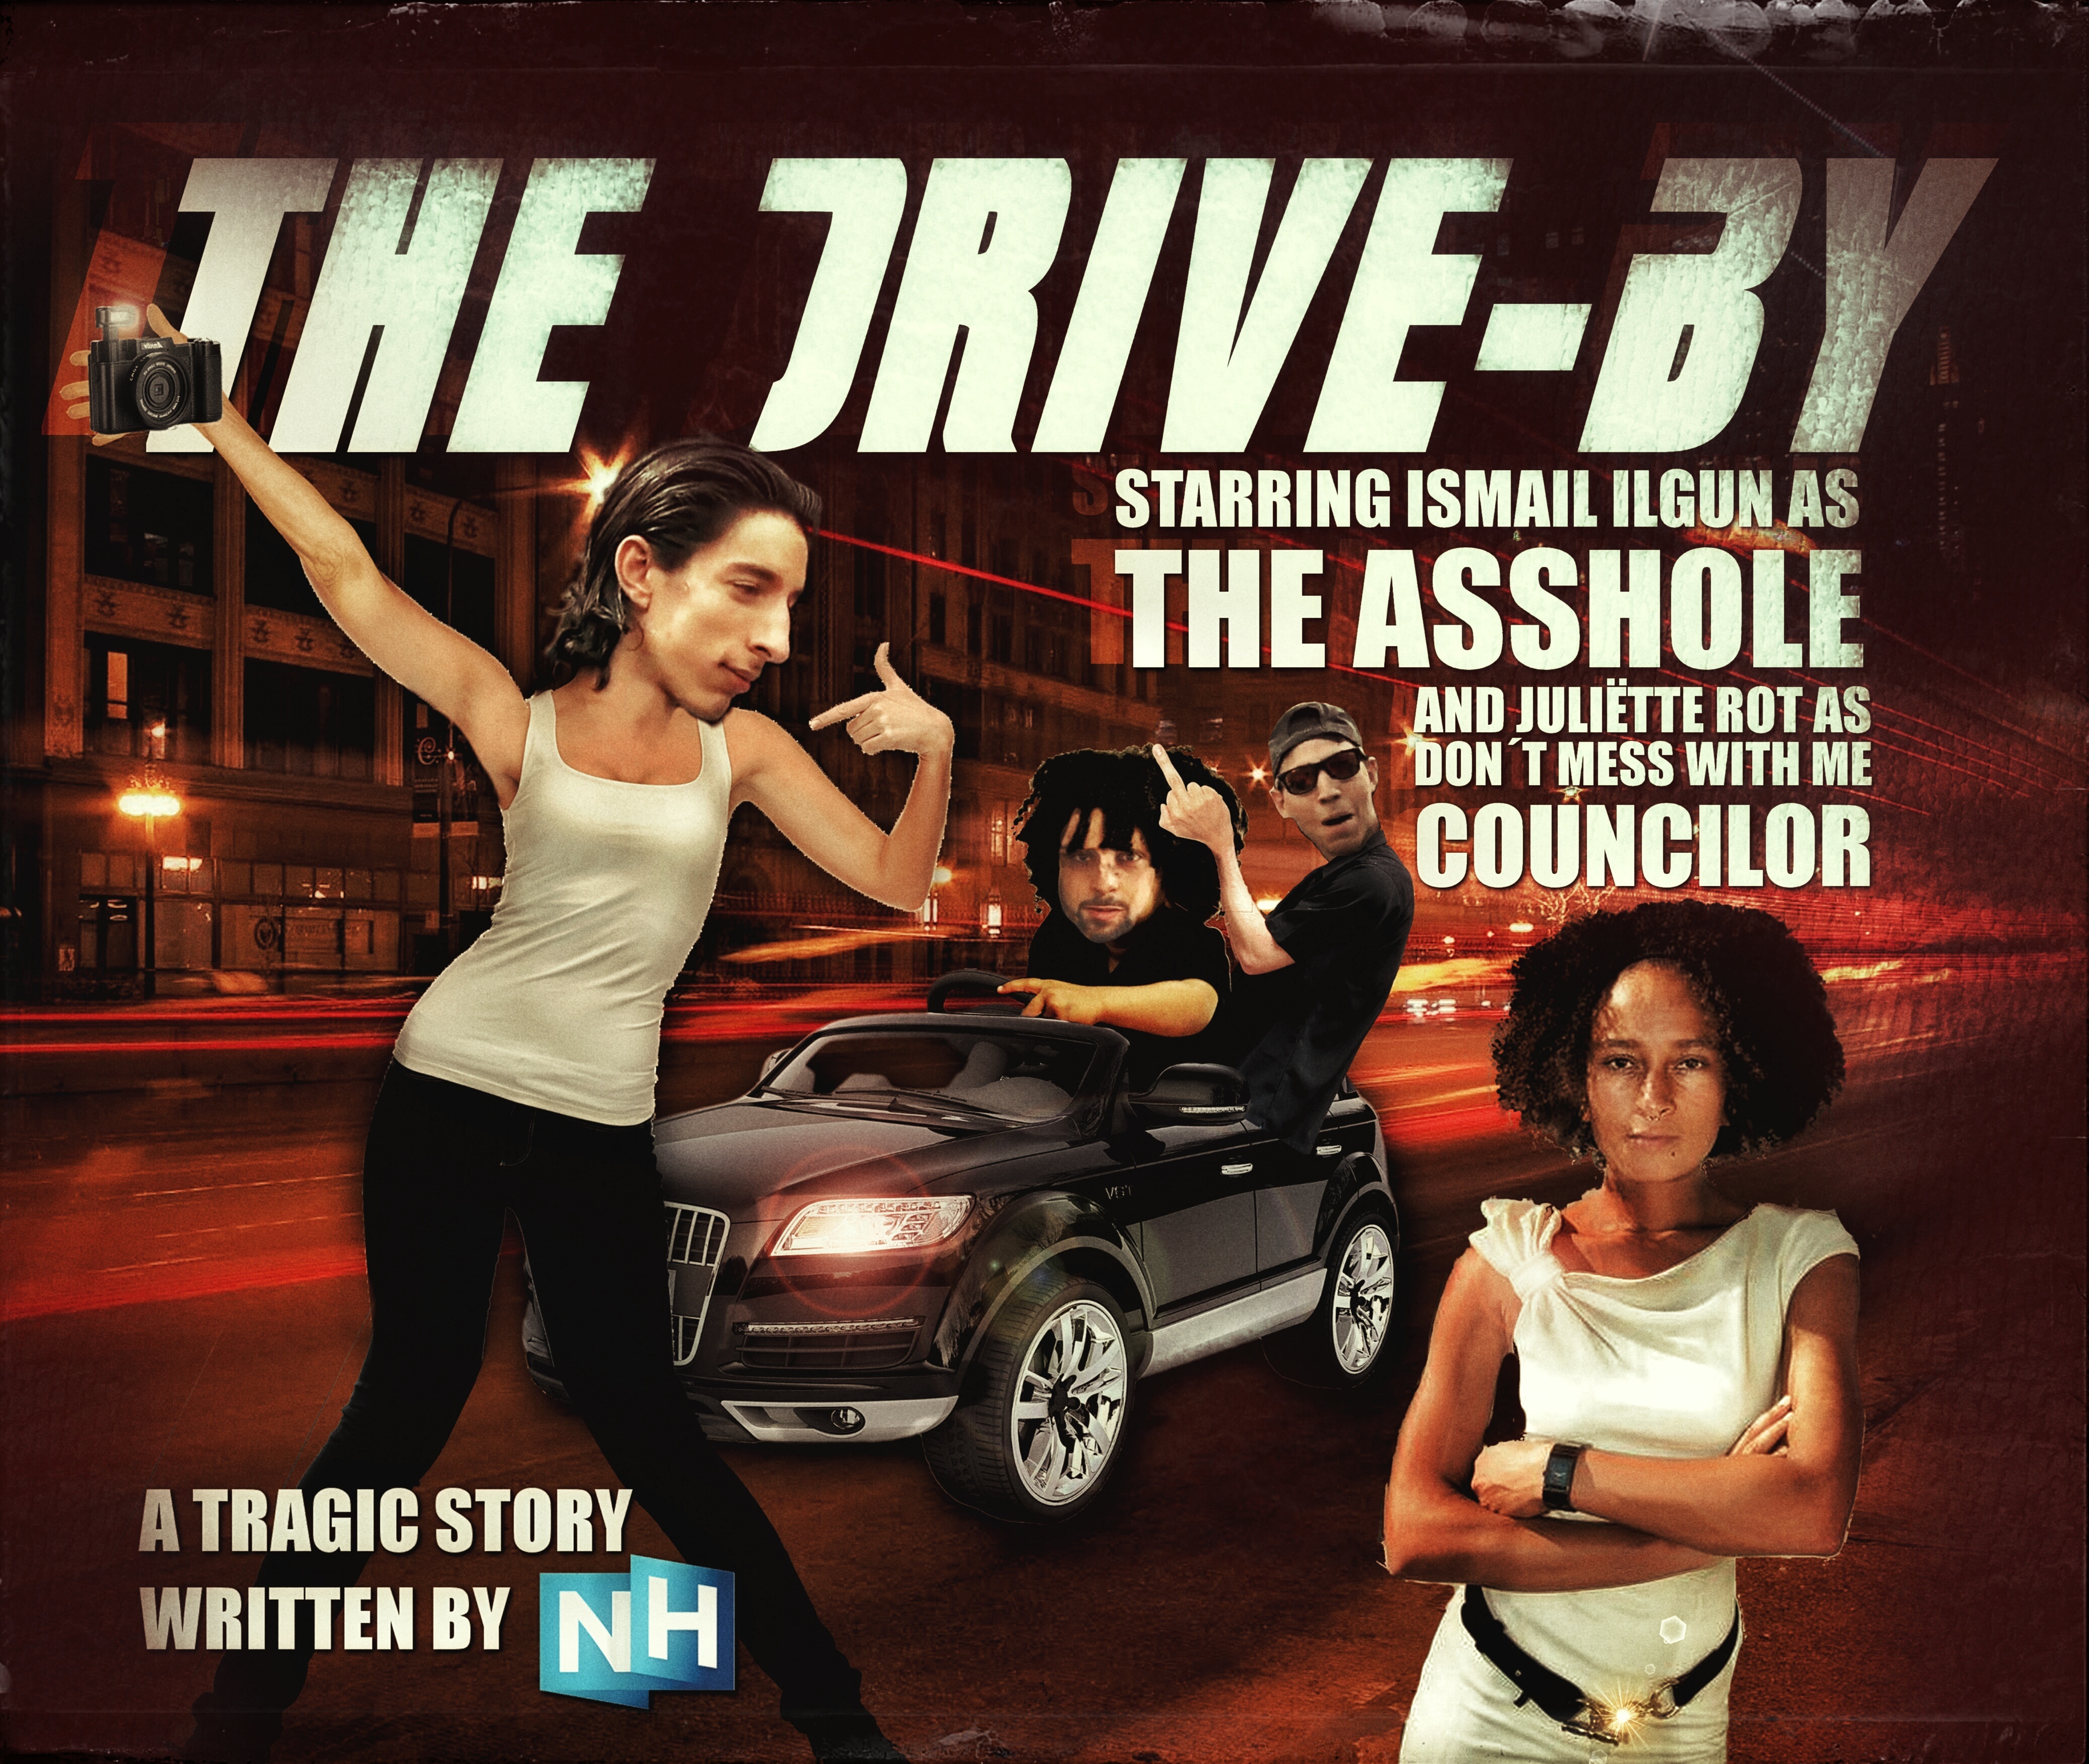 The Drive-by